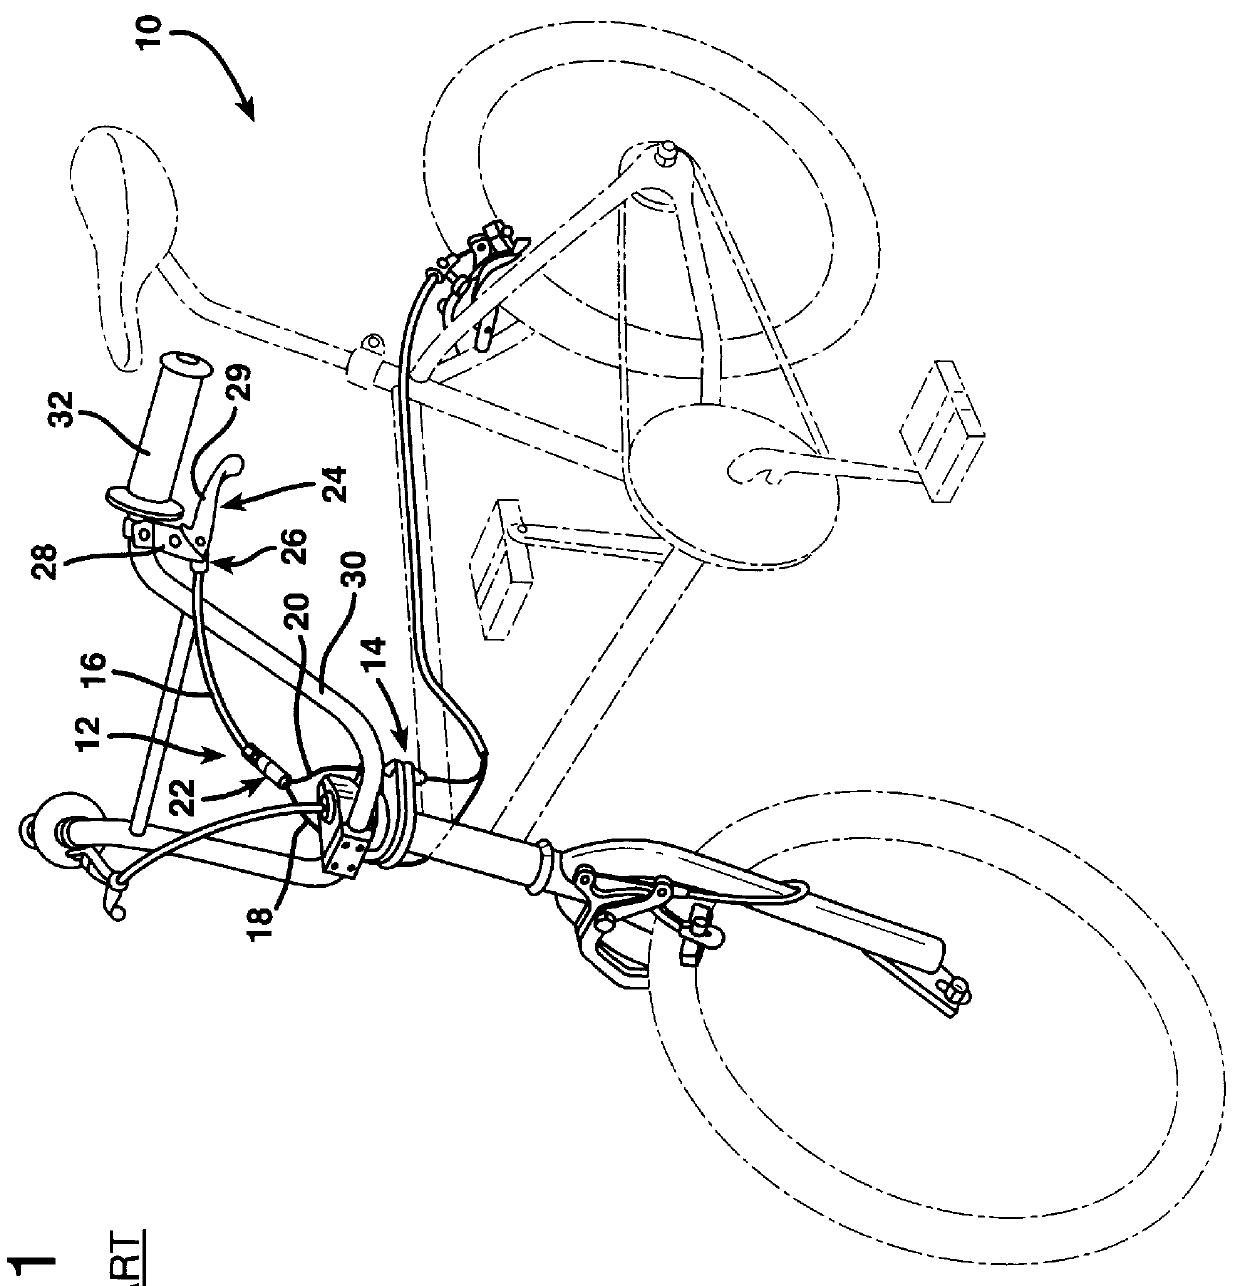 Bicycle brake cable system